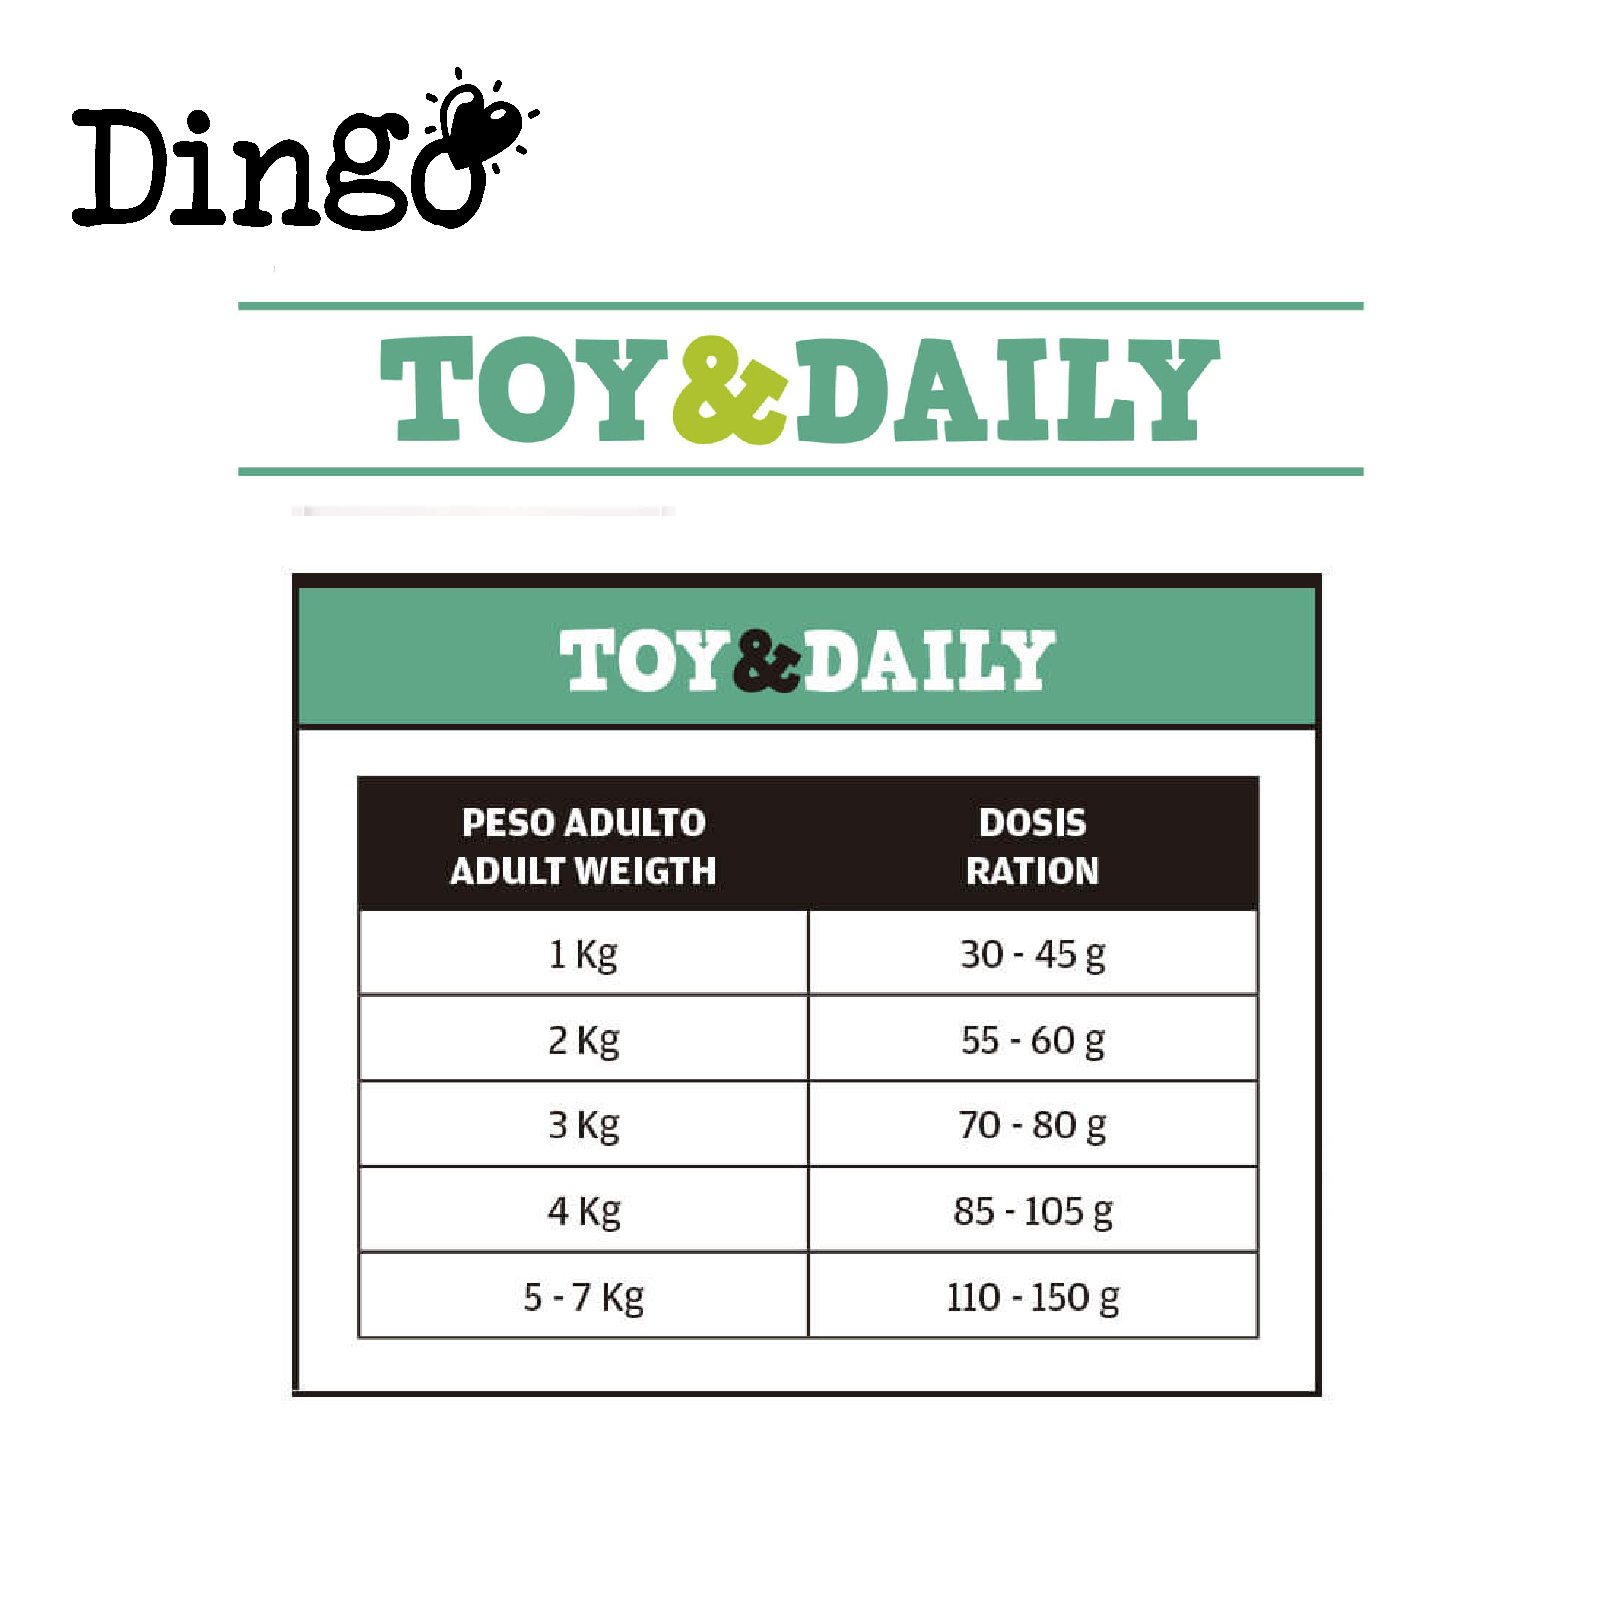 DNG DINGO TOY &amp; DAILY